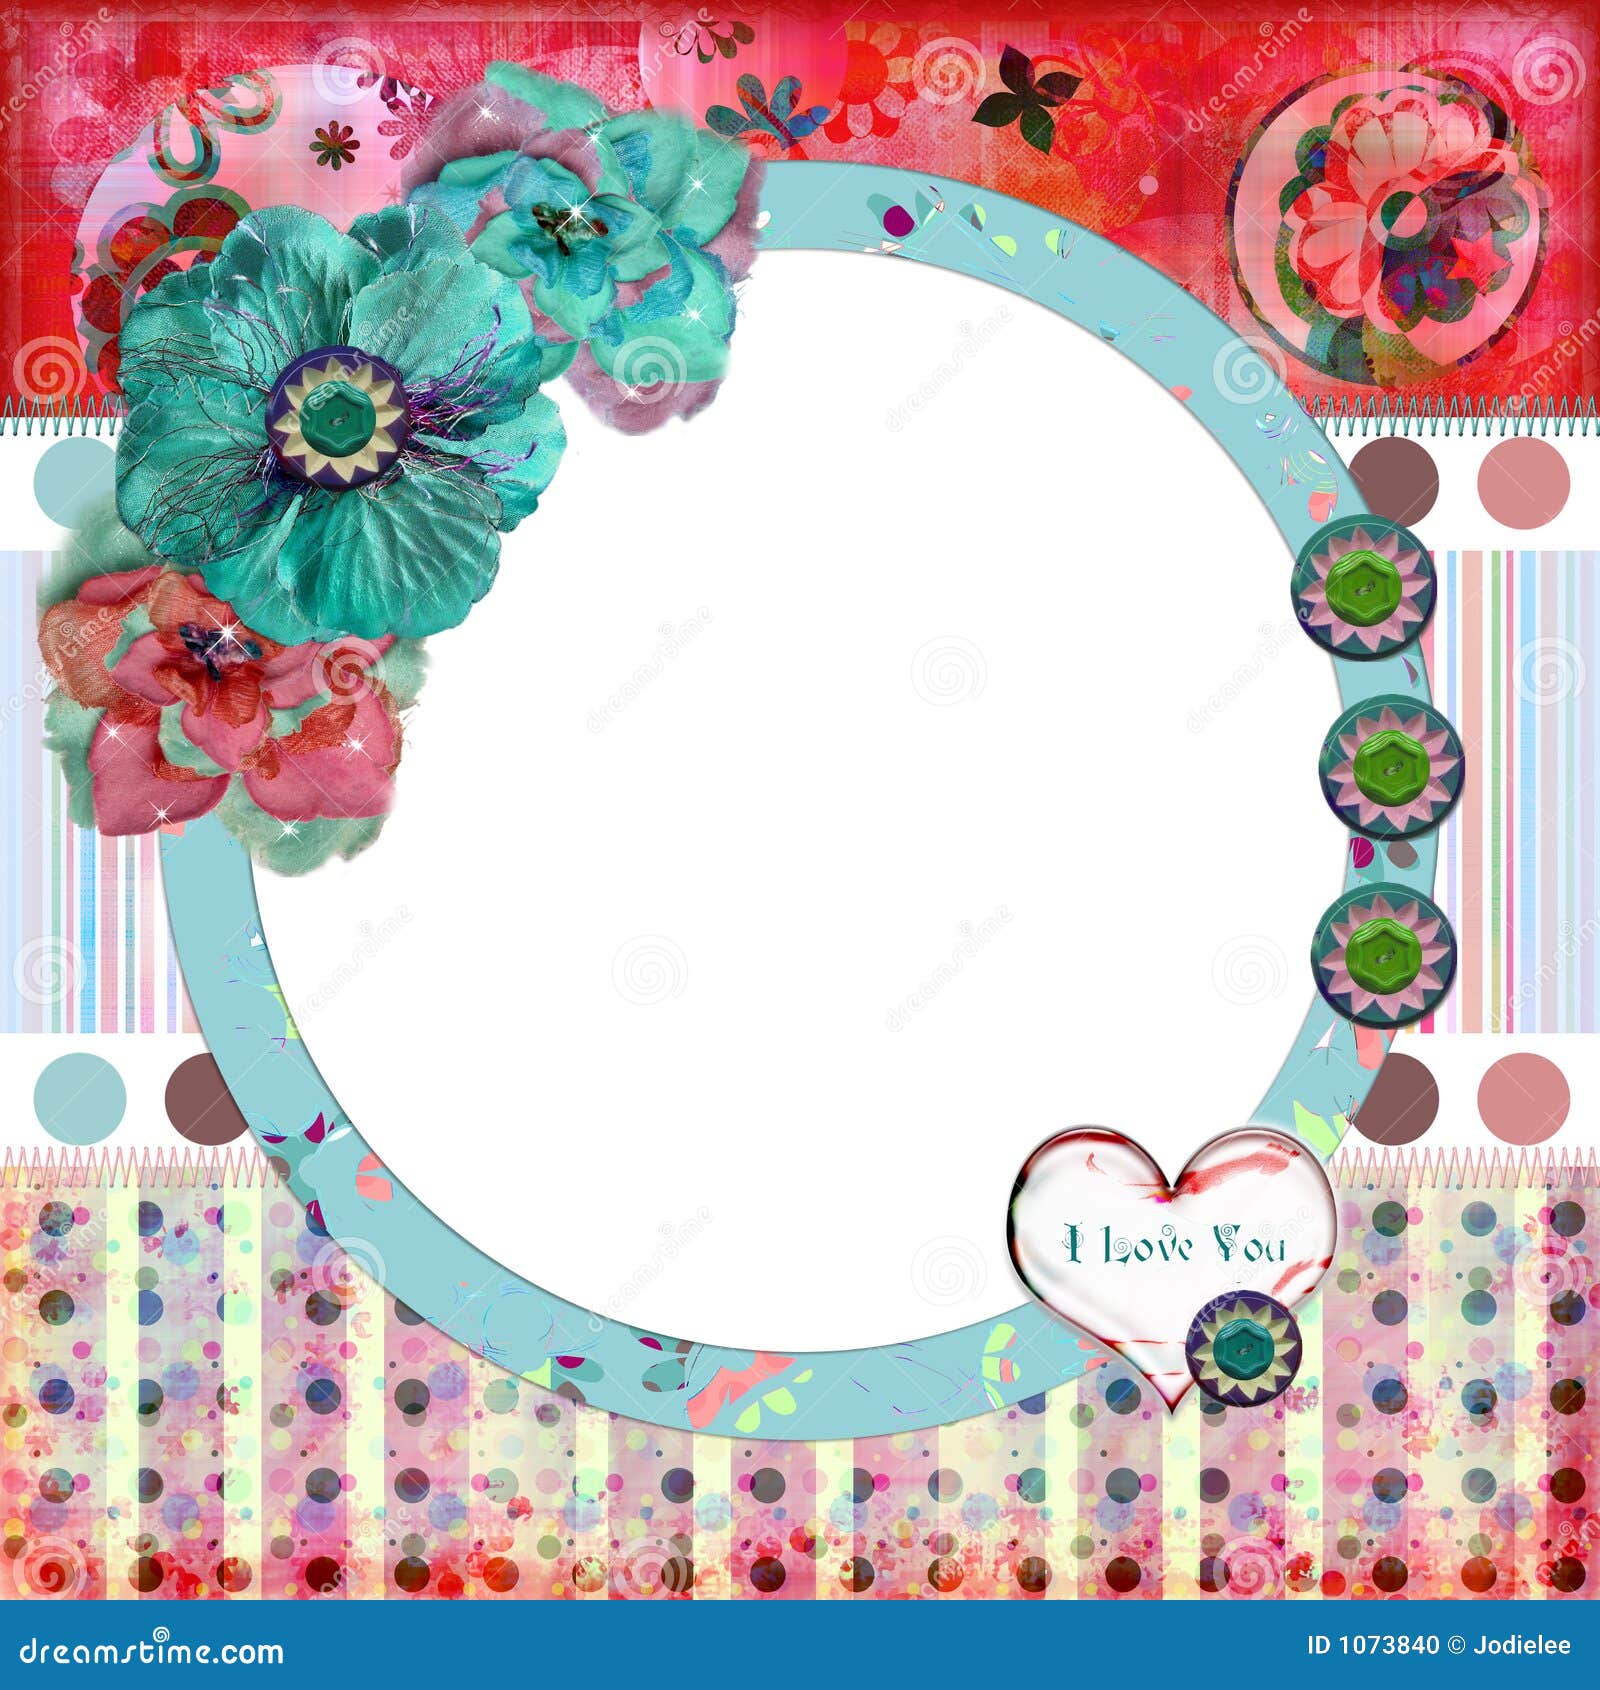 shabby floral photo frame/scrapbooking background